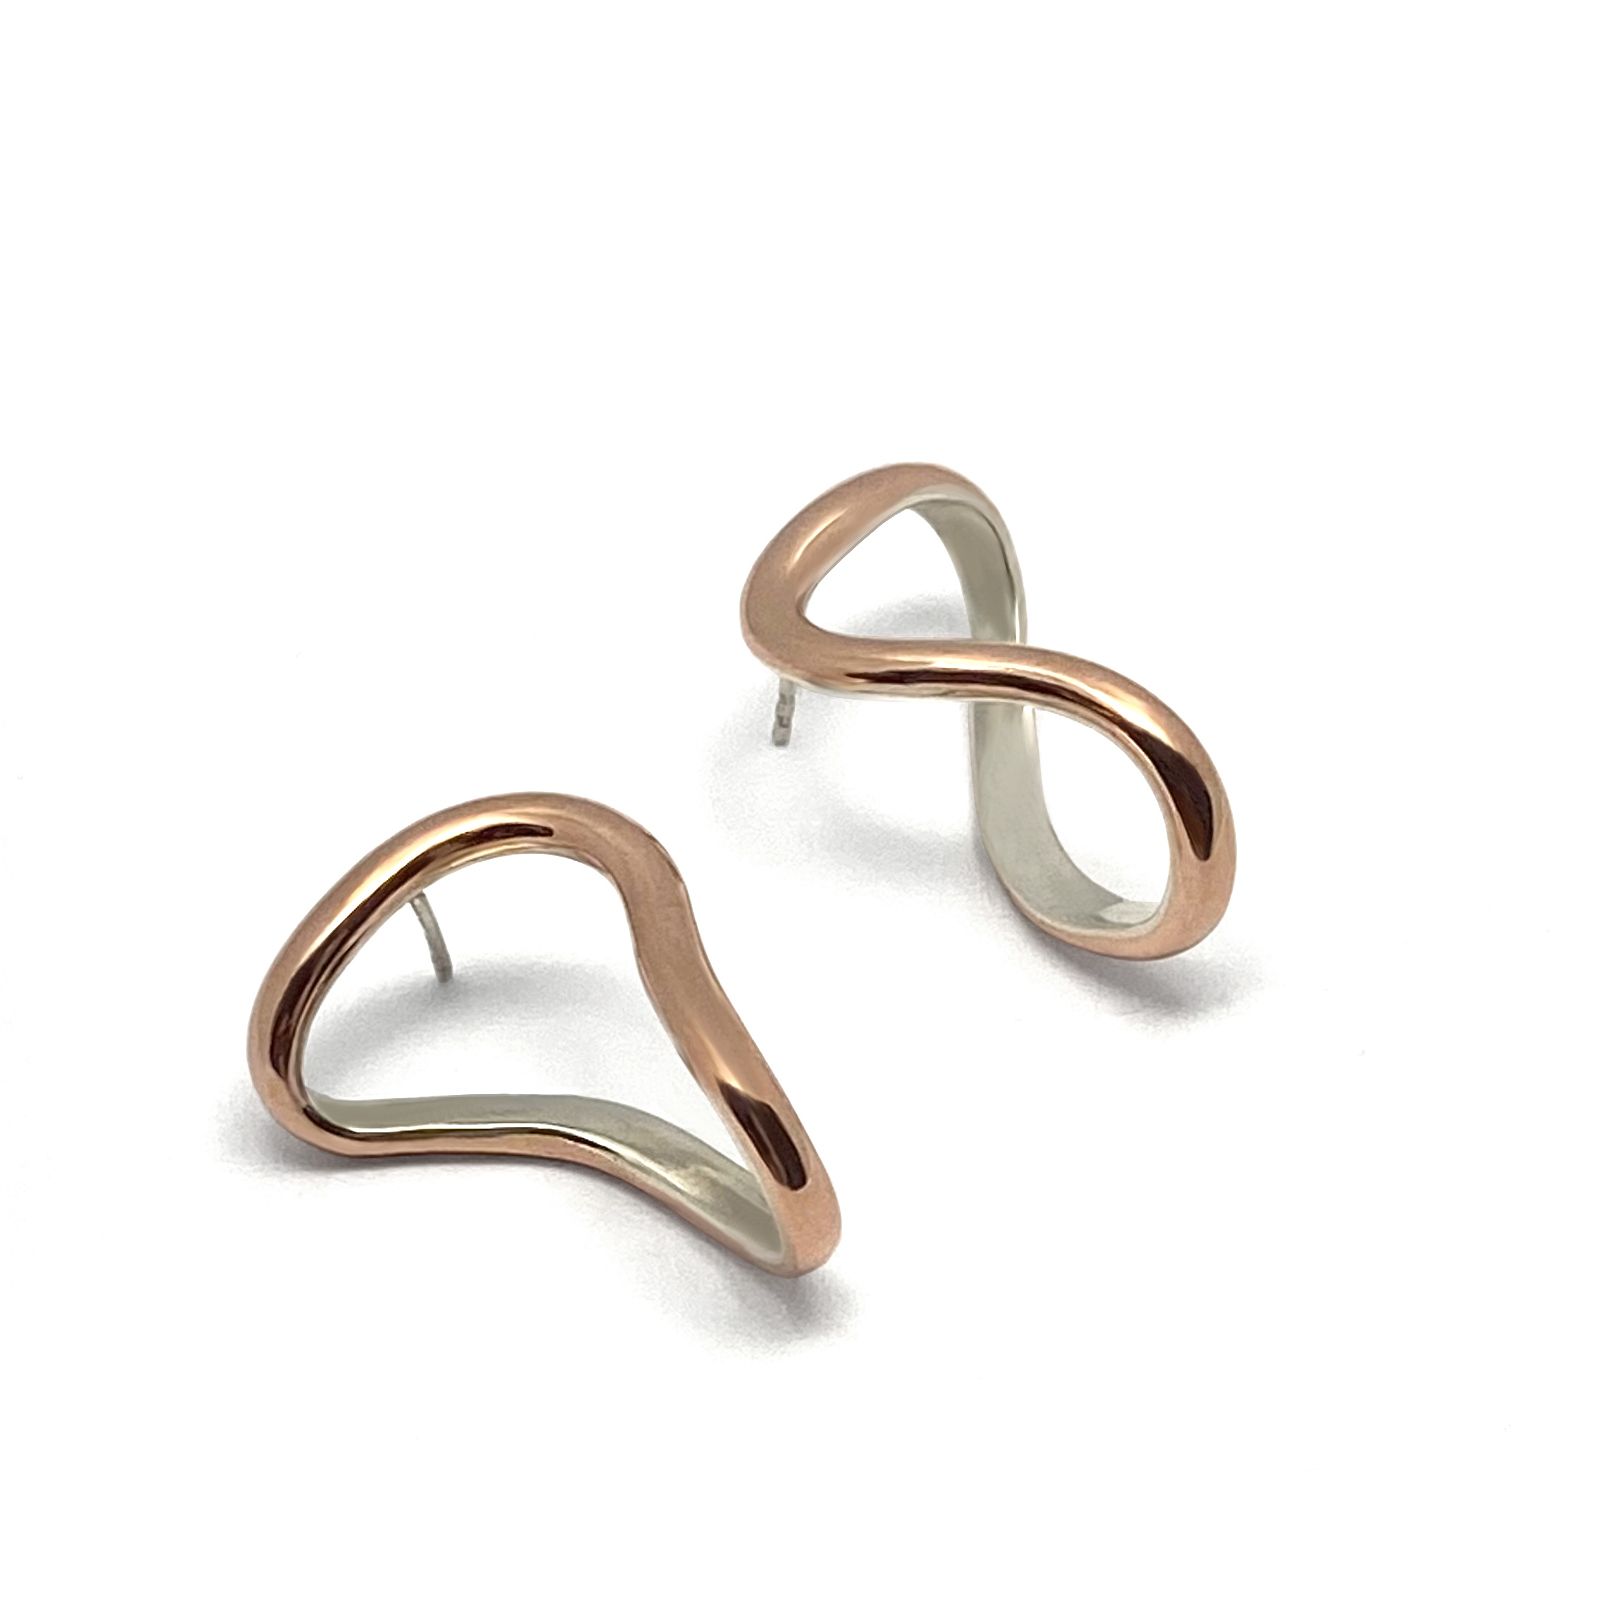 Claudine Moncion: Cuff Effect Earrings Product Image 1 of 1